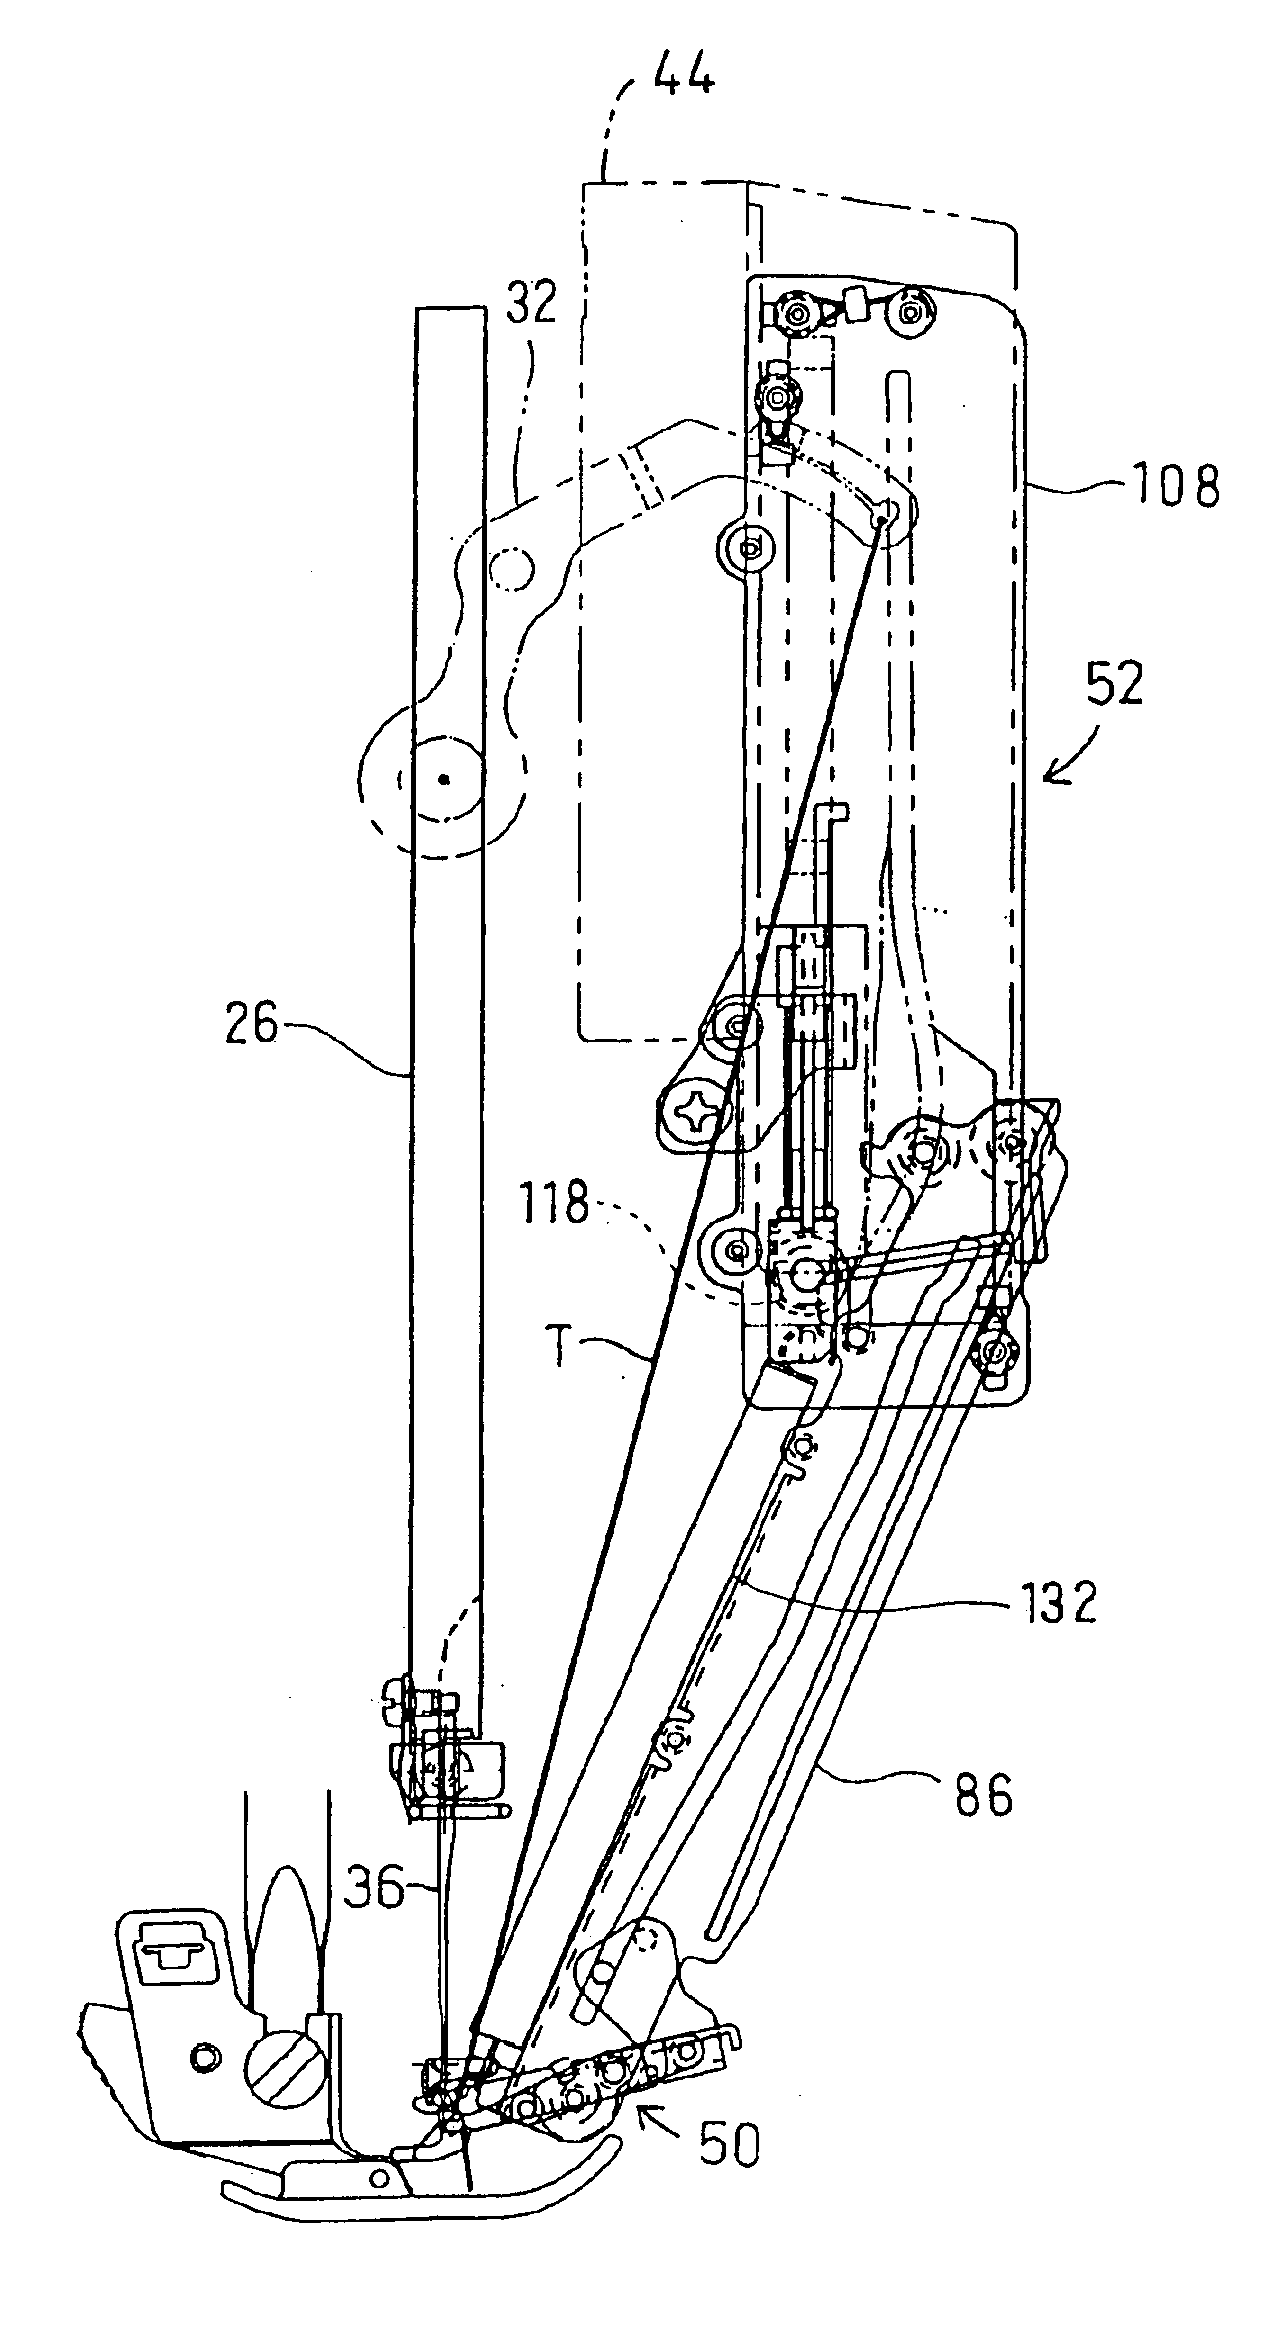 Threading apparatus for sewing machine